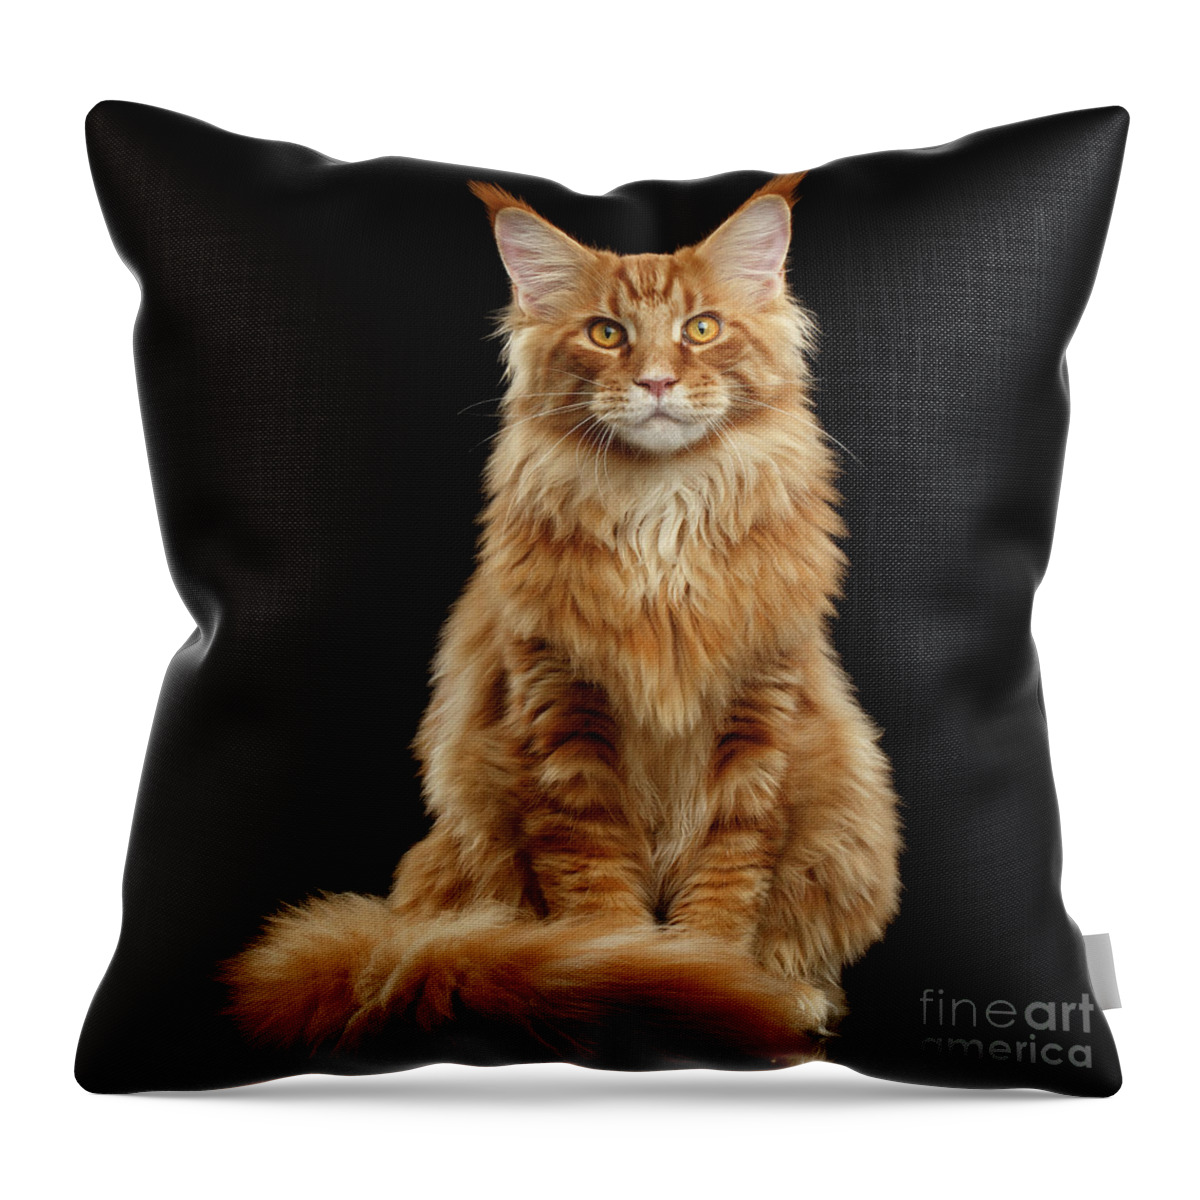 Angry Throw Pillow featuring the photograph Portrait of Ginger Maine Coon Cat Isolated on Black Background by Sergey Taran